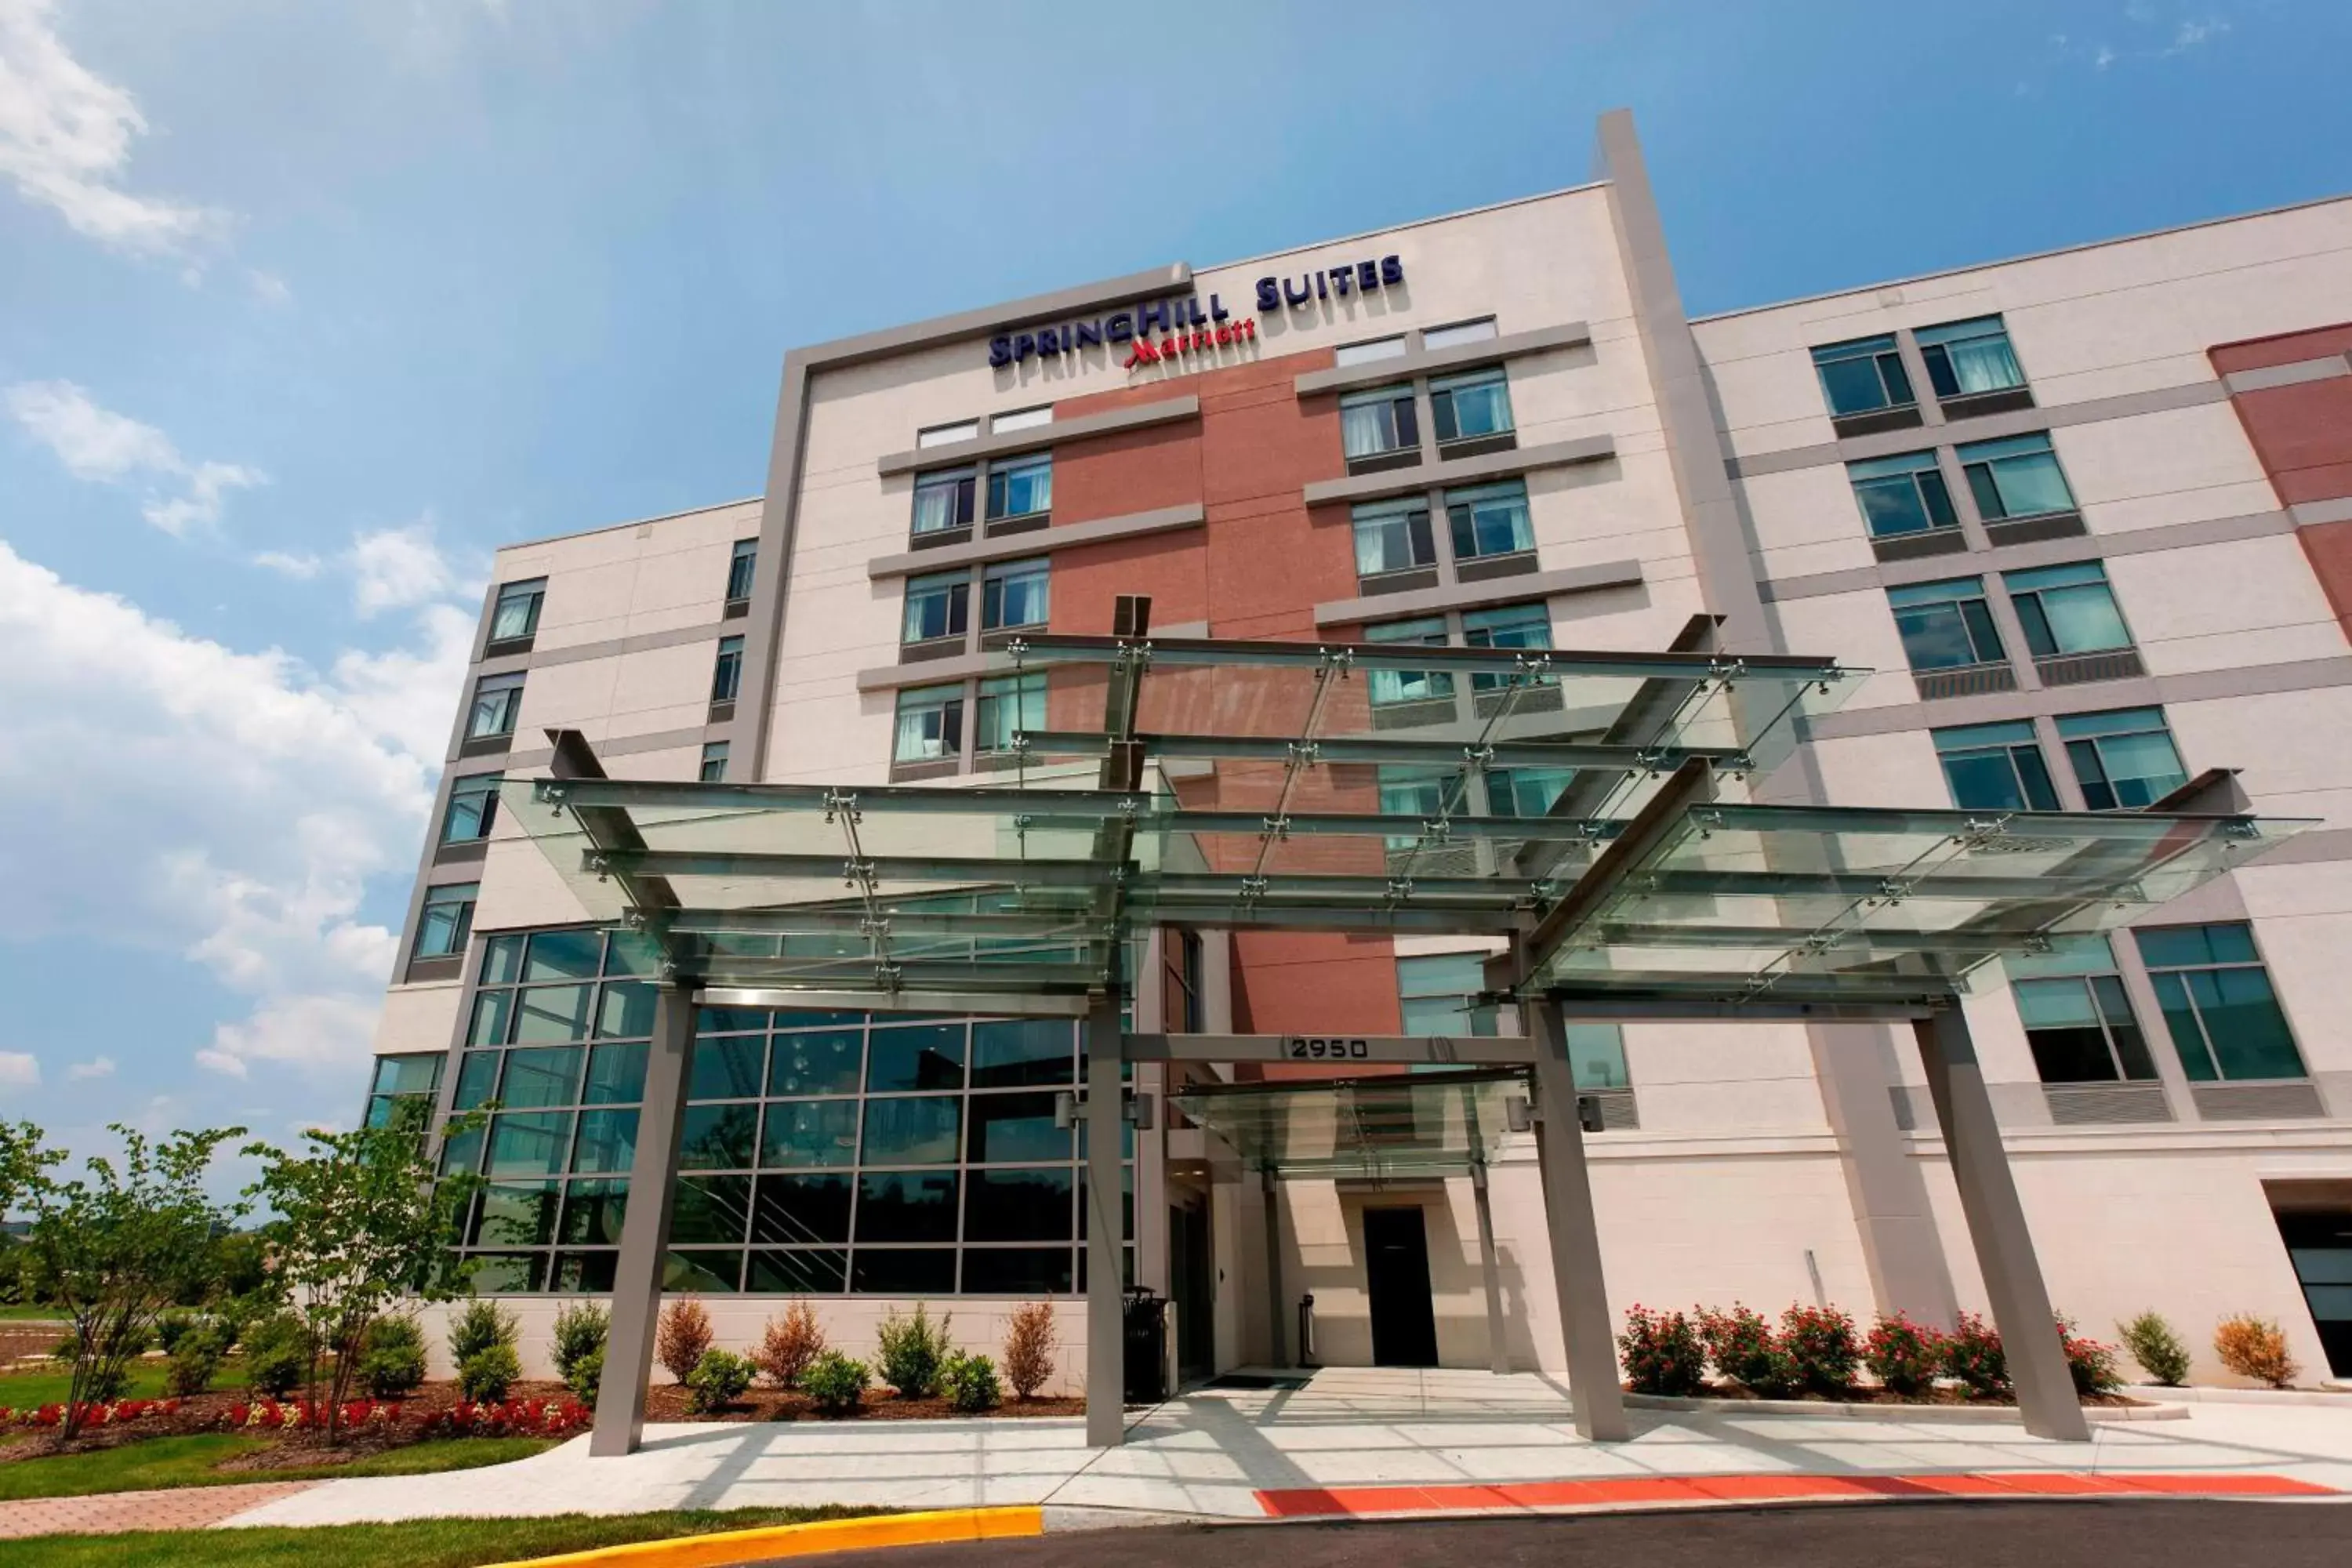 Property Building in SpringHill Suites Alexandria Southwest